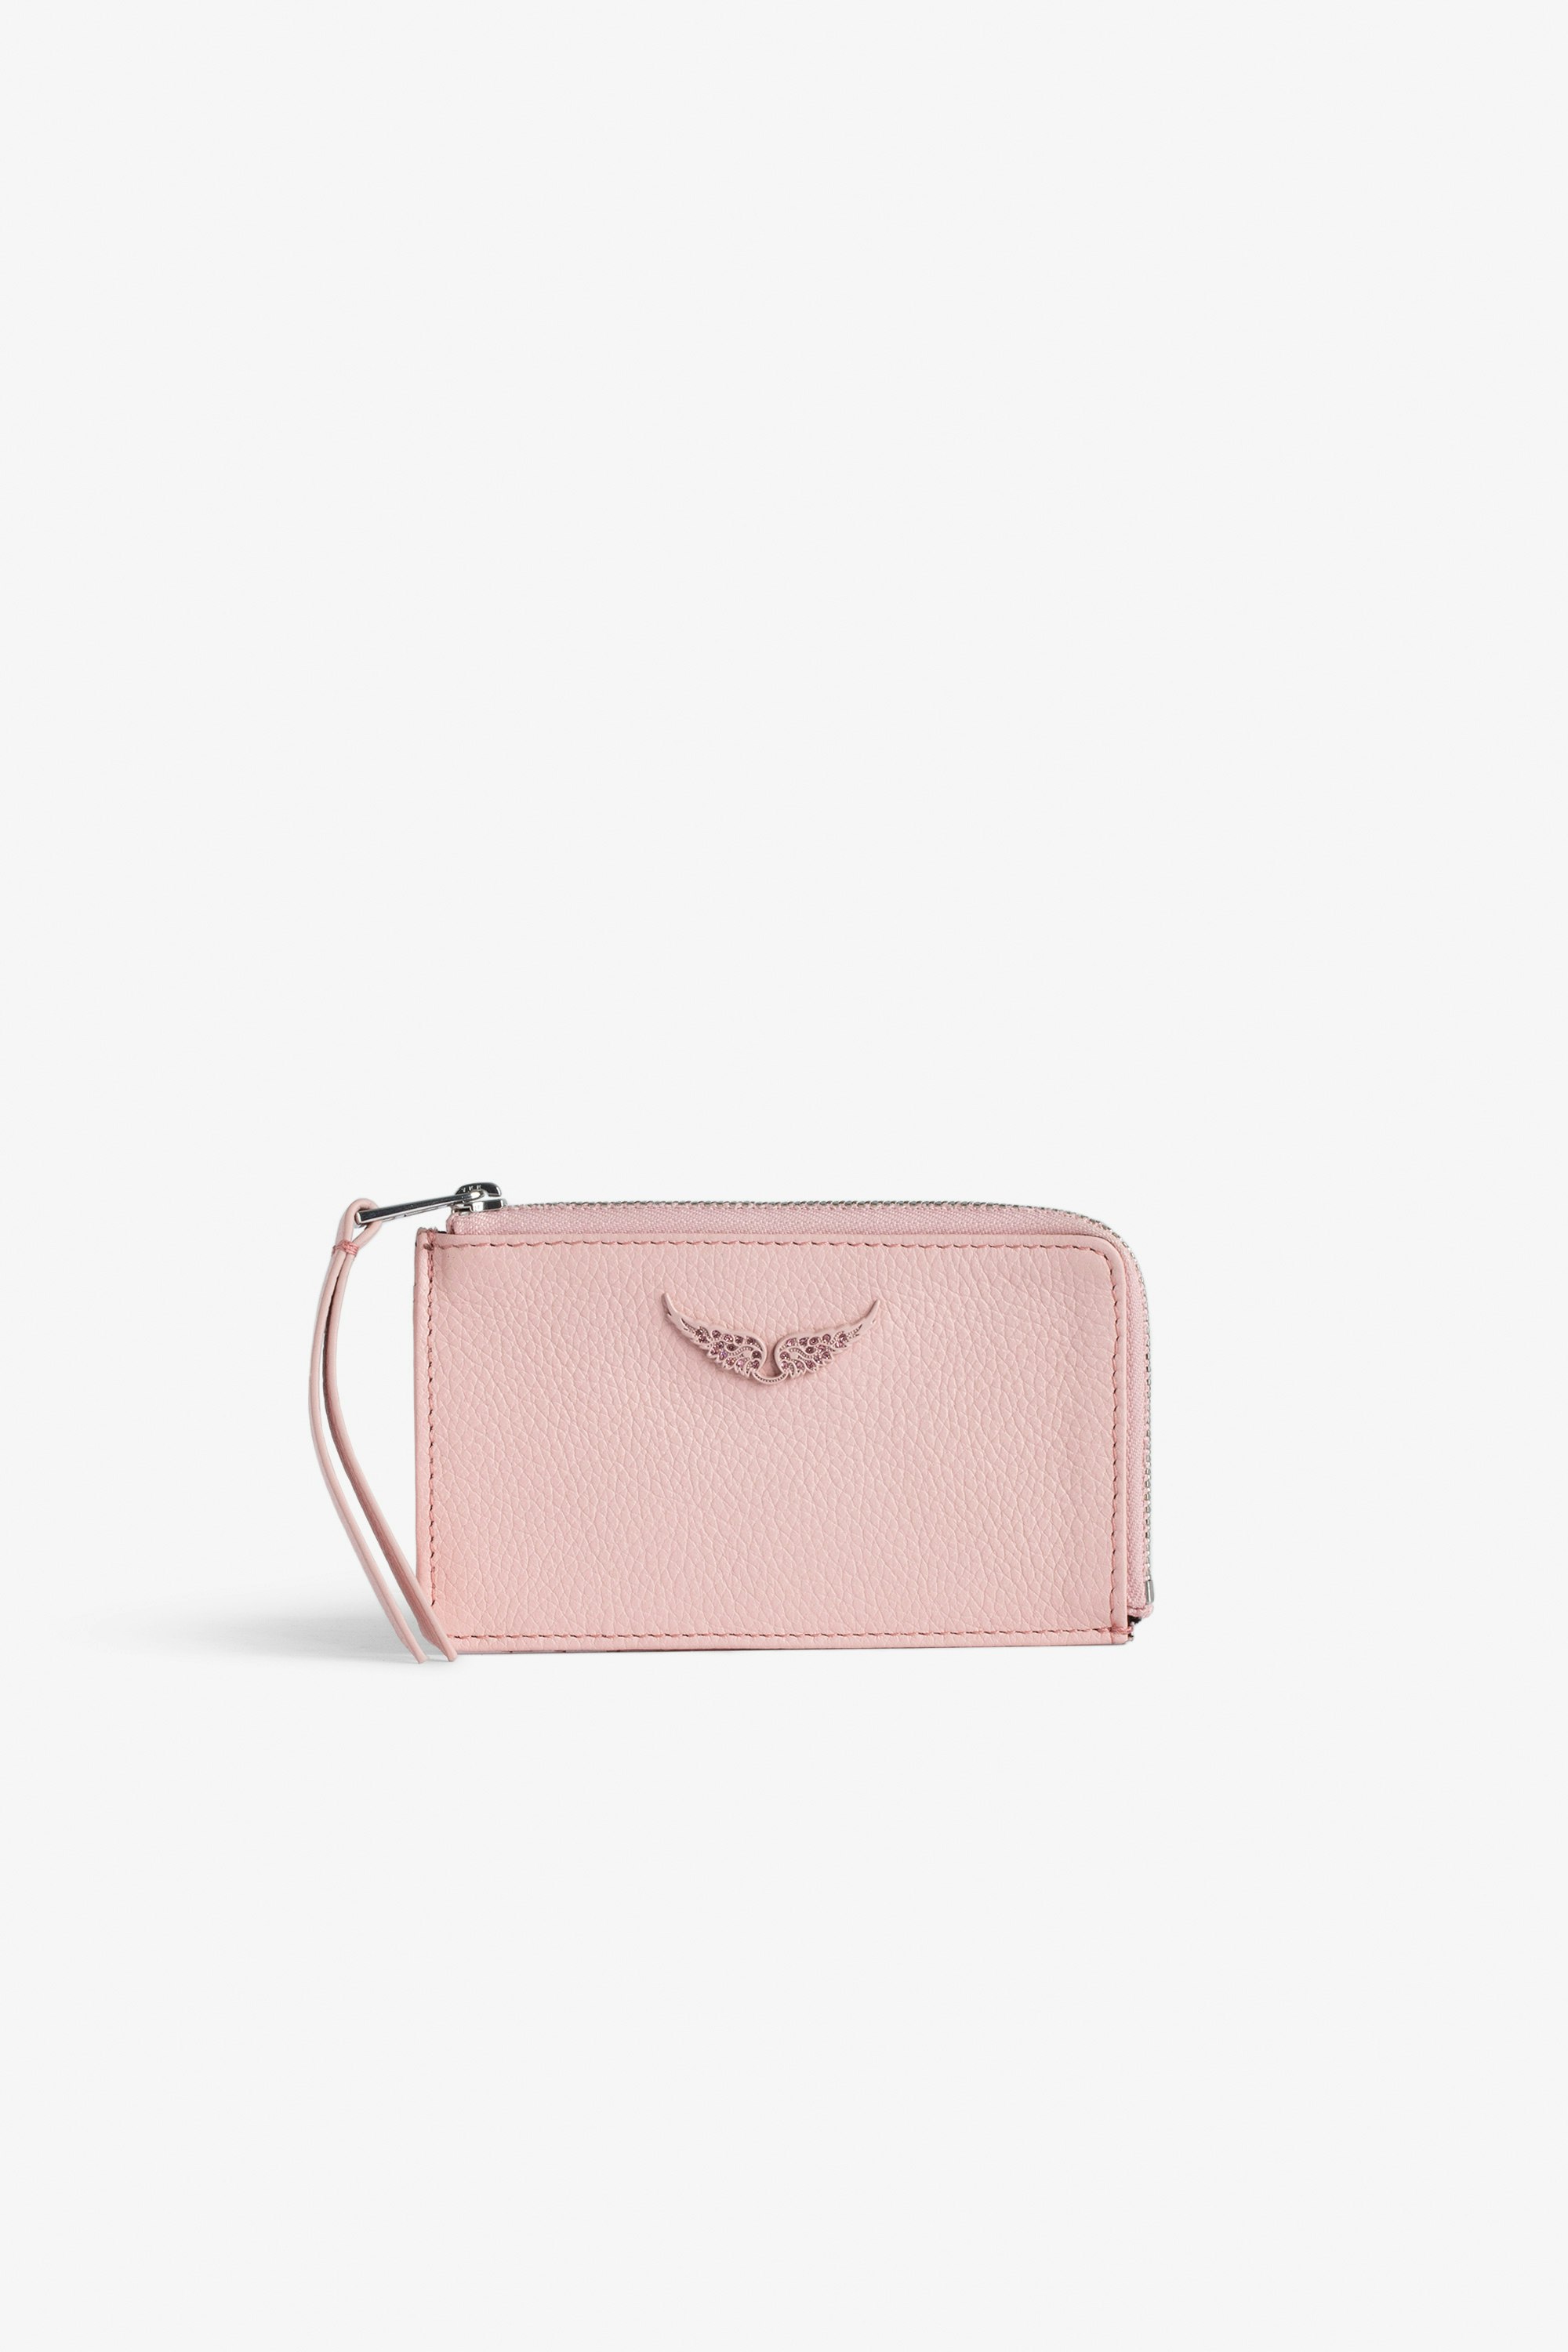 ZV Card 財布 - Women’s pink grained leather card holder with wings charm.